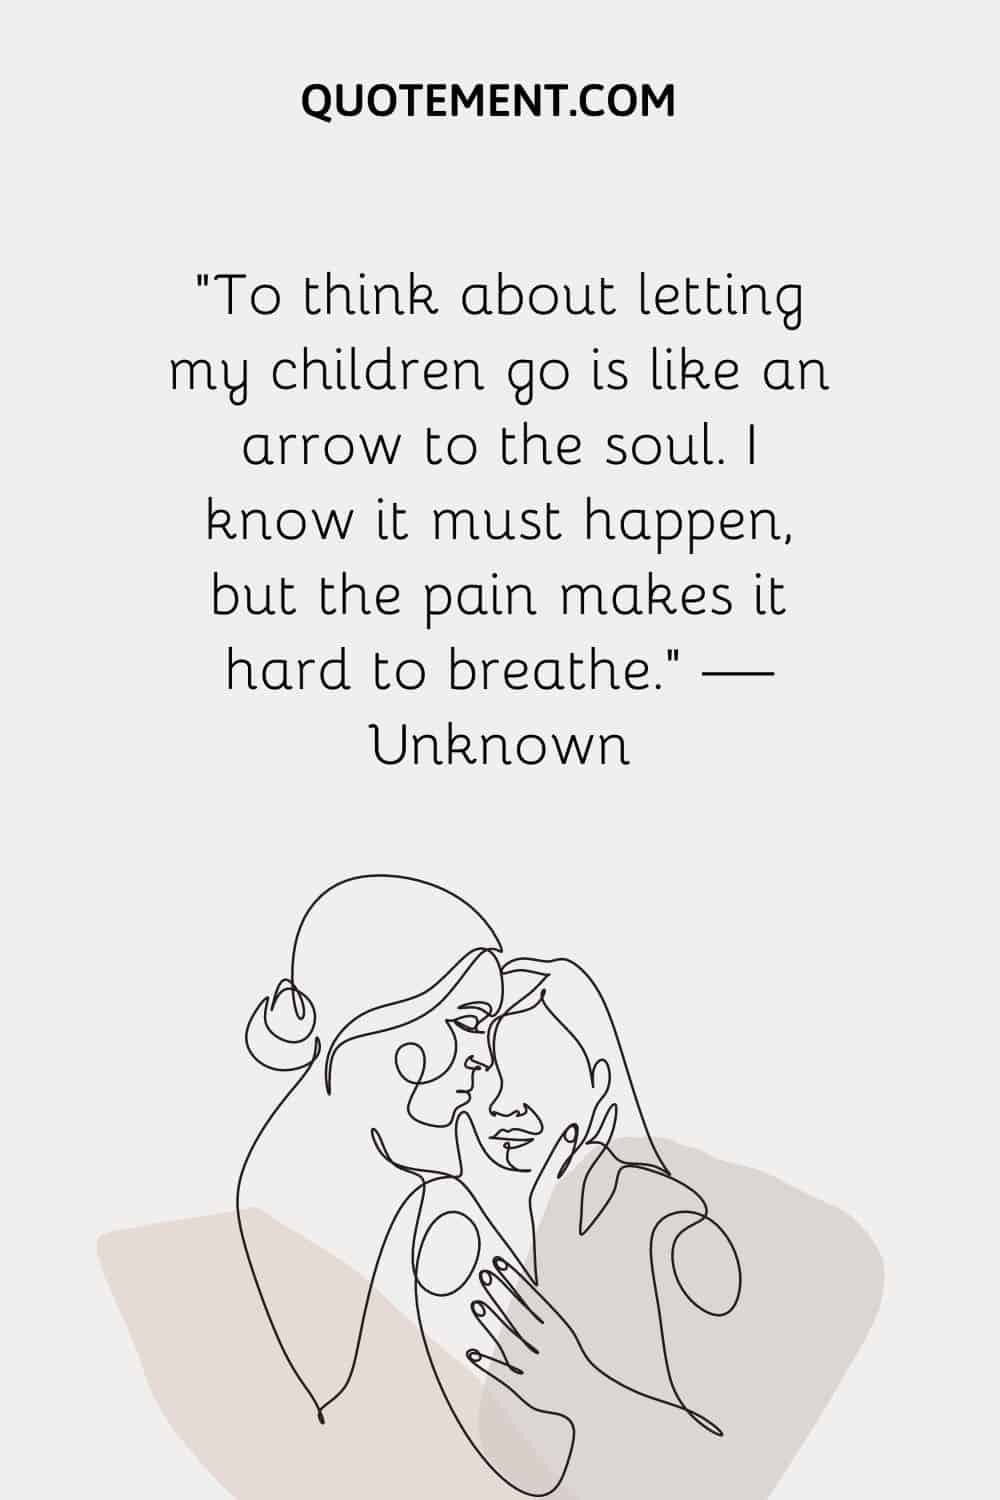 “To think about letting my children go is like an arrow to the soul. I know it must happen, but the pain makes it hard to breathe.” — Unknown